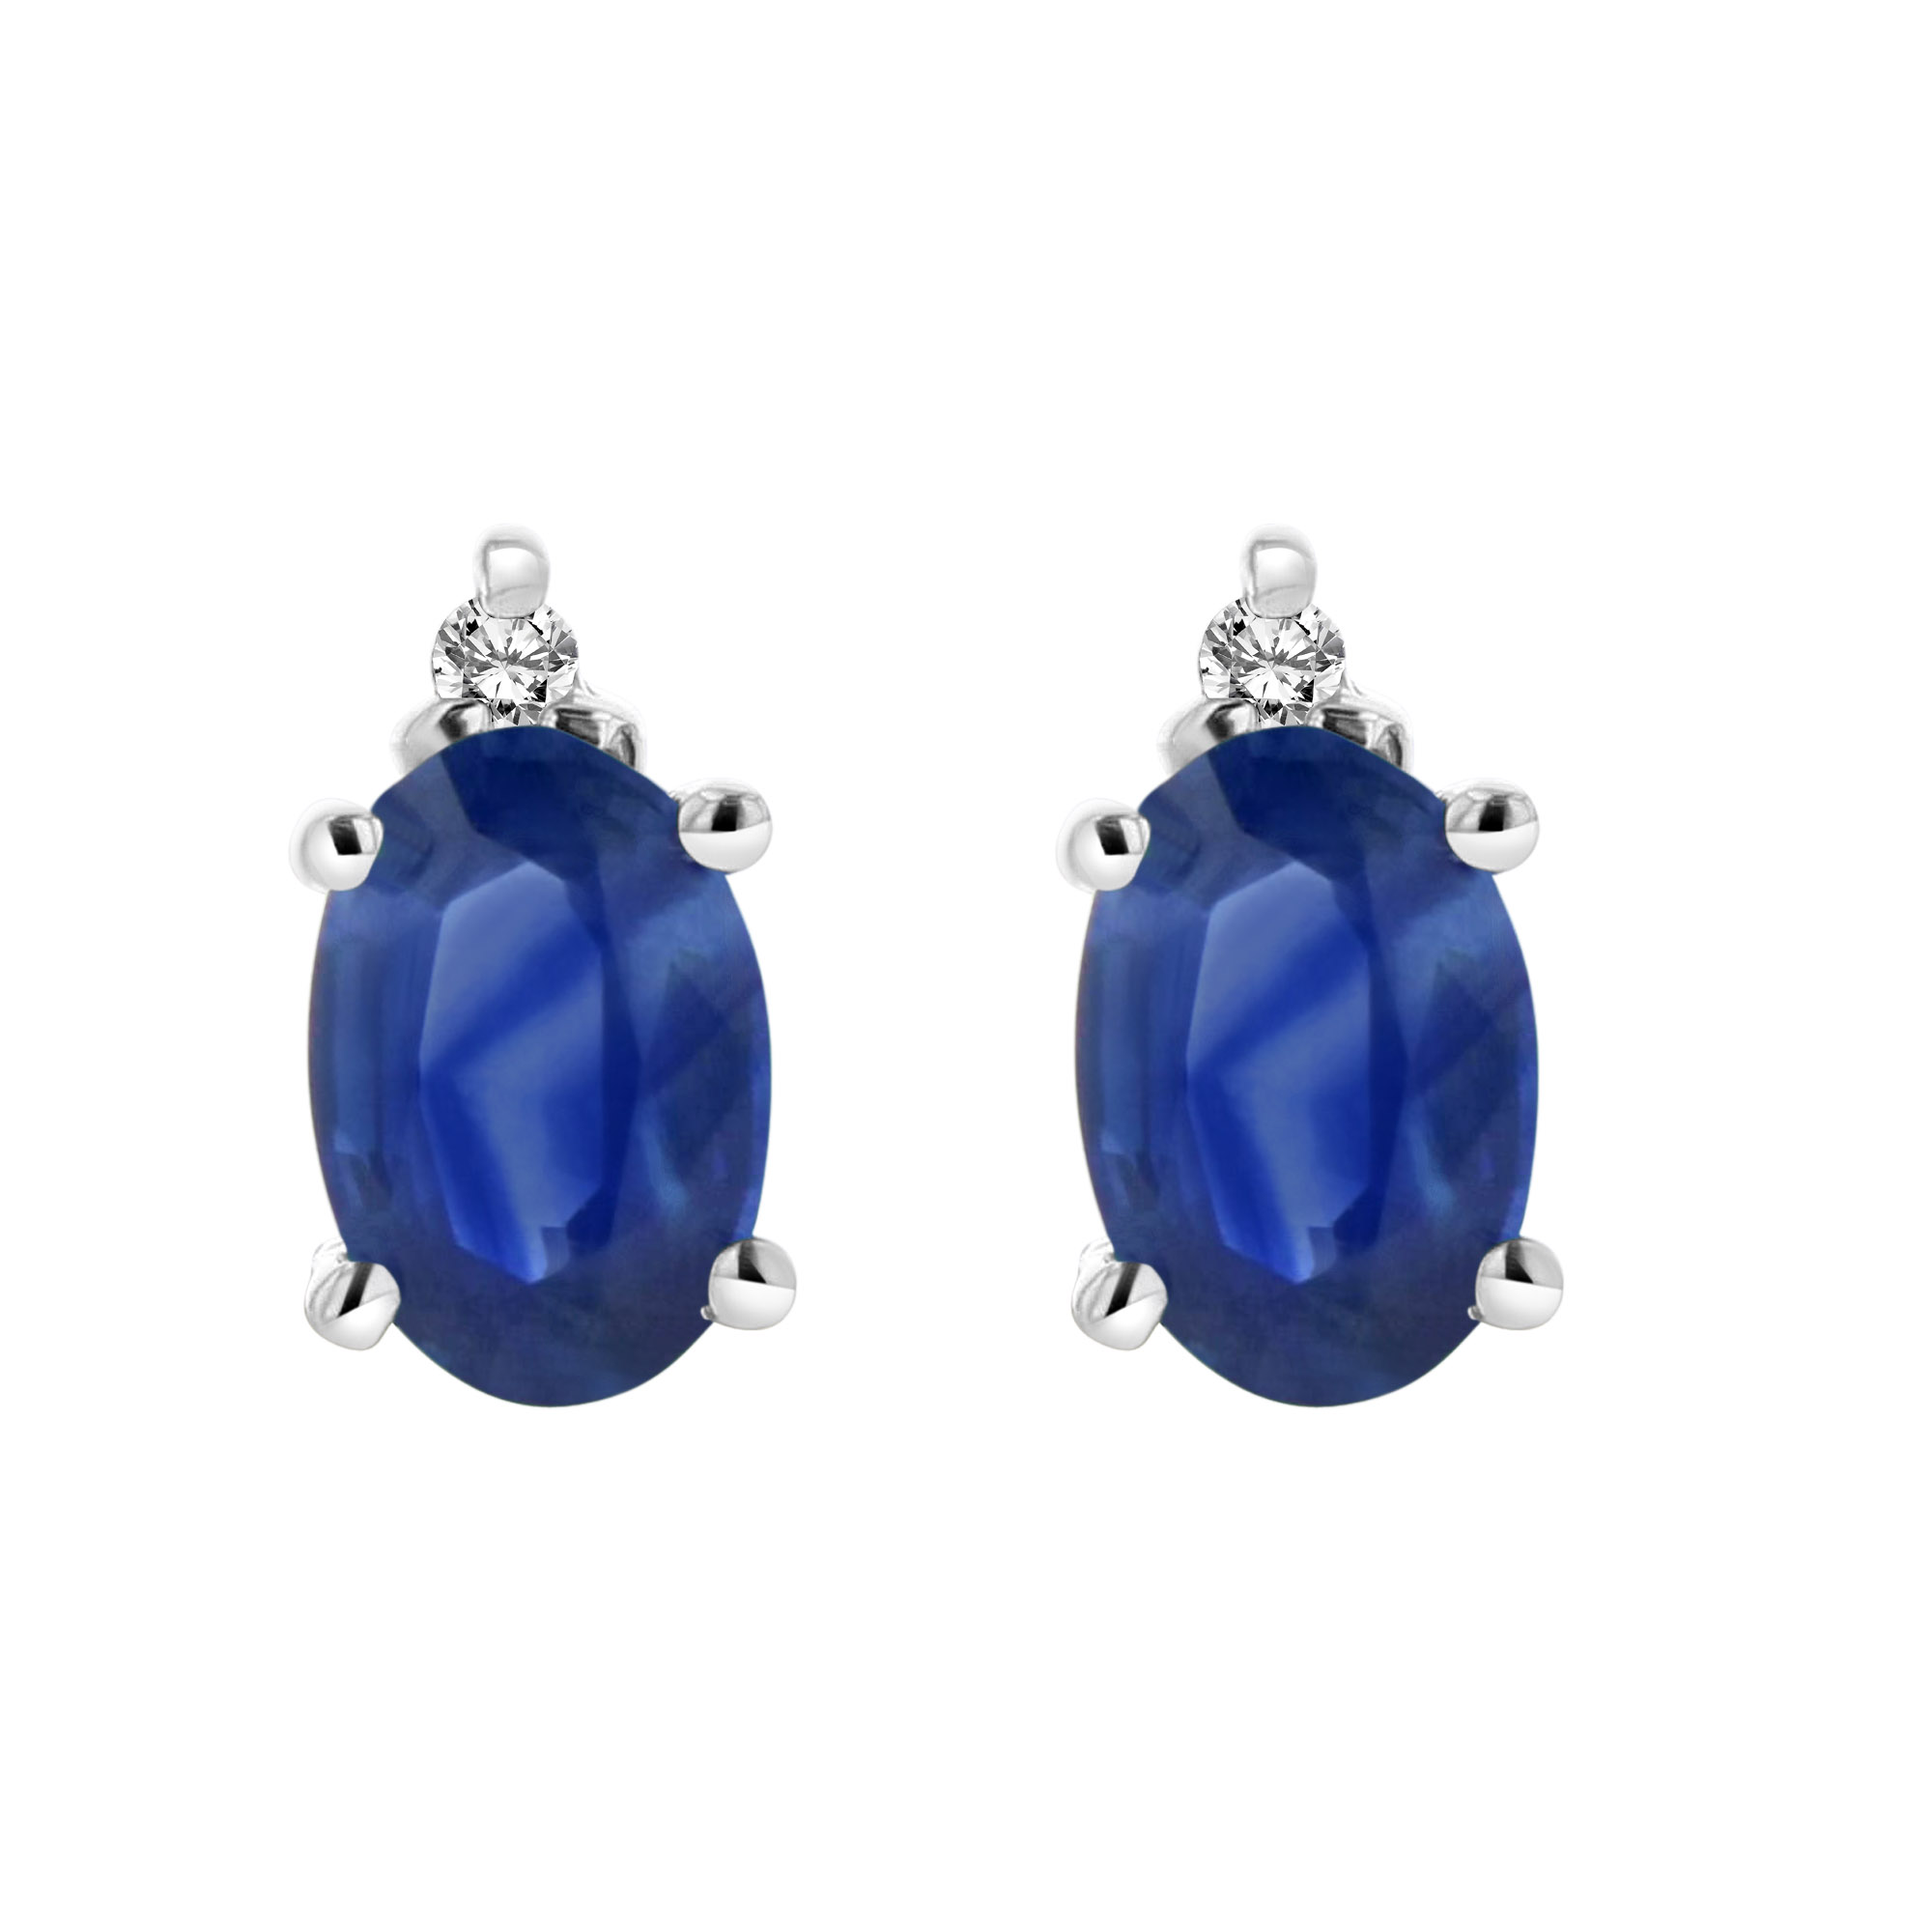 View Oval Sapphire and Diamond Earring in 14k Gold